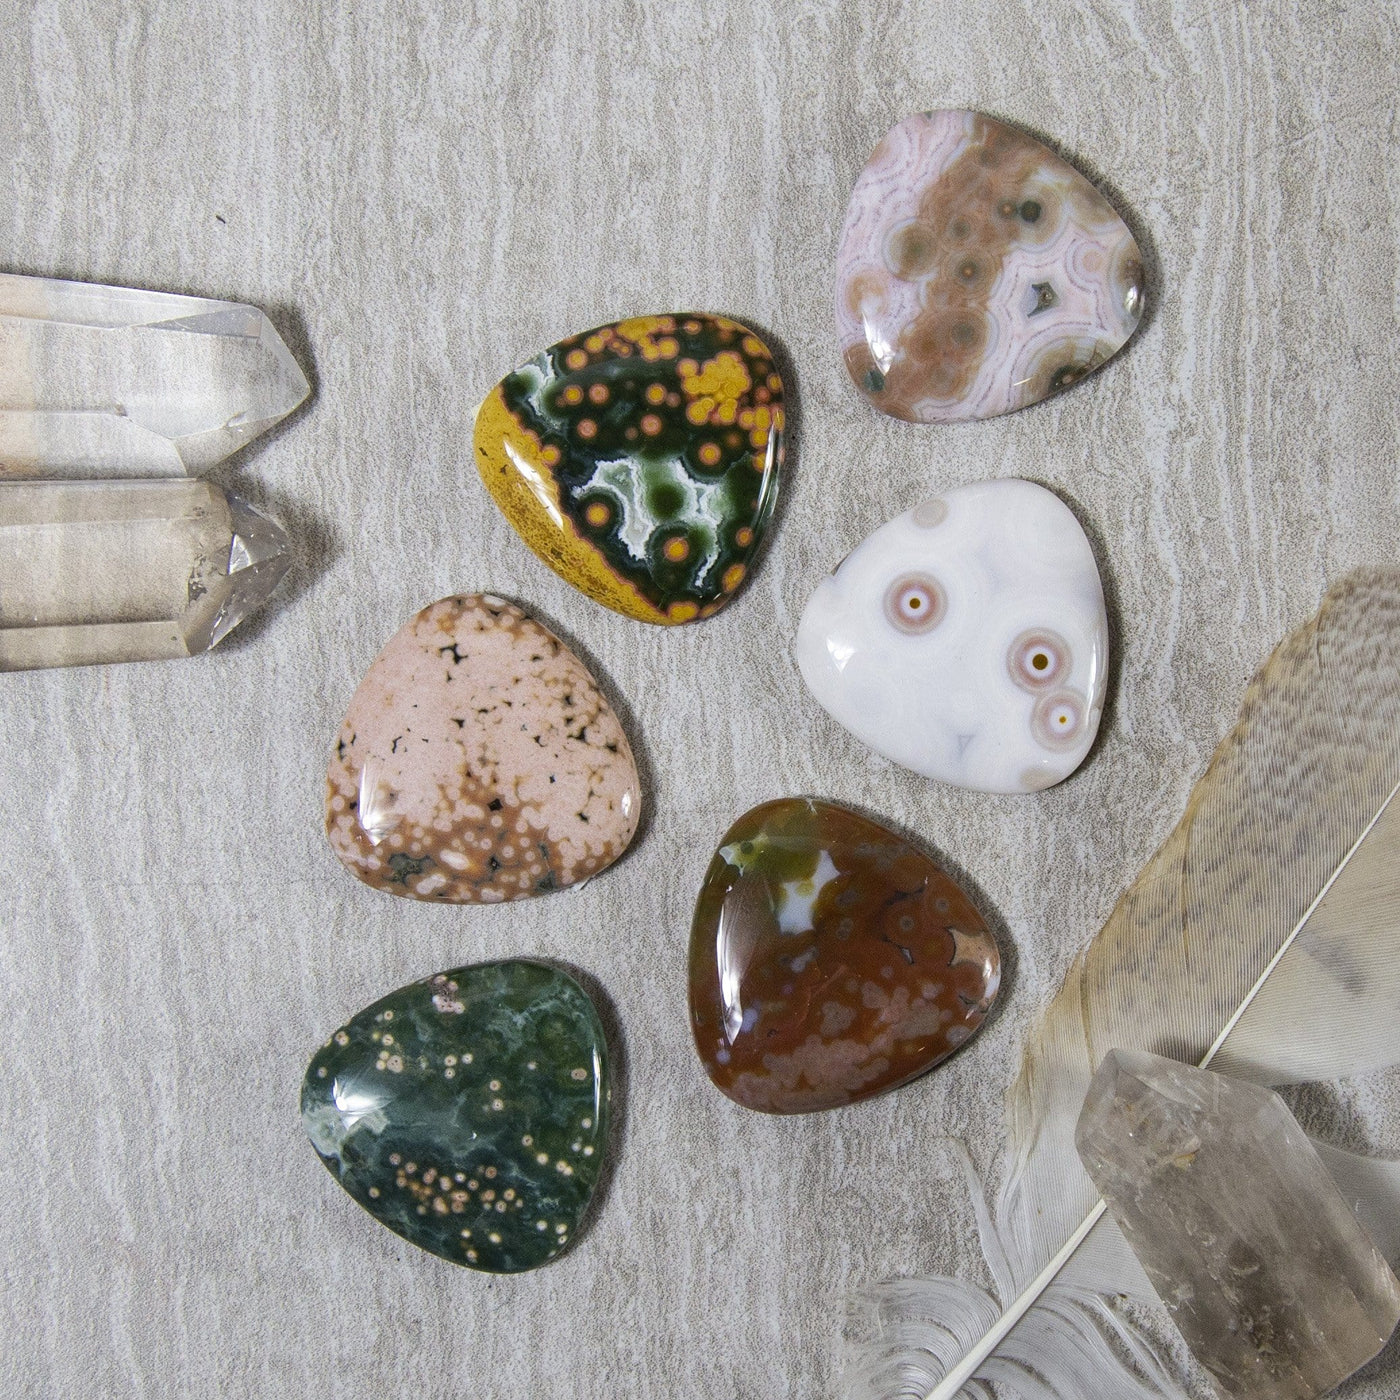 multiple Triangle Shaped Jasper Cabochons displayed on gray background showing various patterns and color formations such as spots waves of line formations greens browns yellows whites tan 